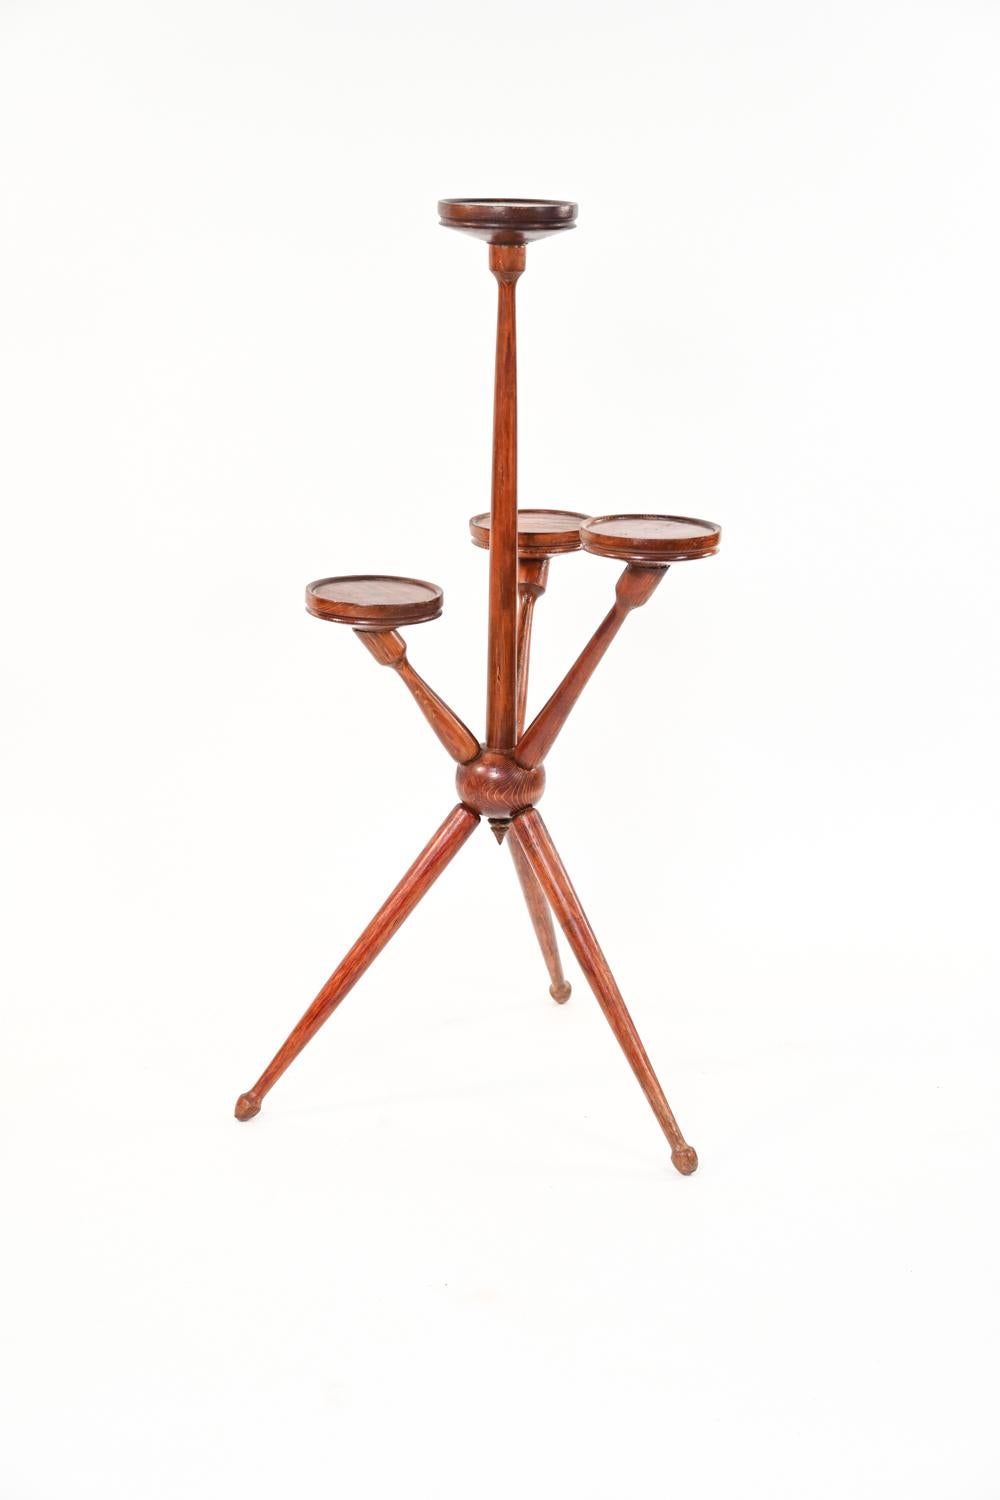 Stained Danish Mid-Century Modern Tripod Tiered Plant Stand